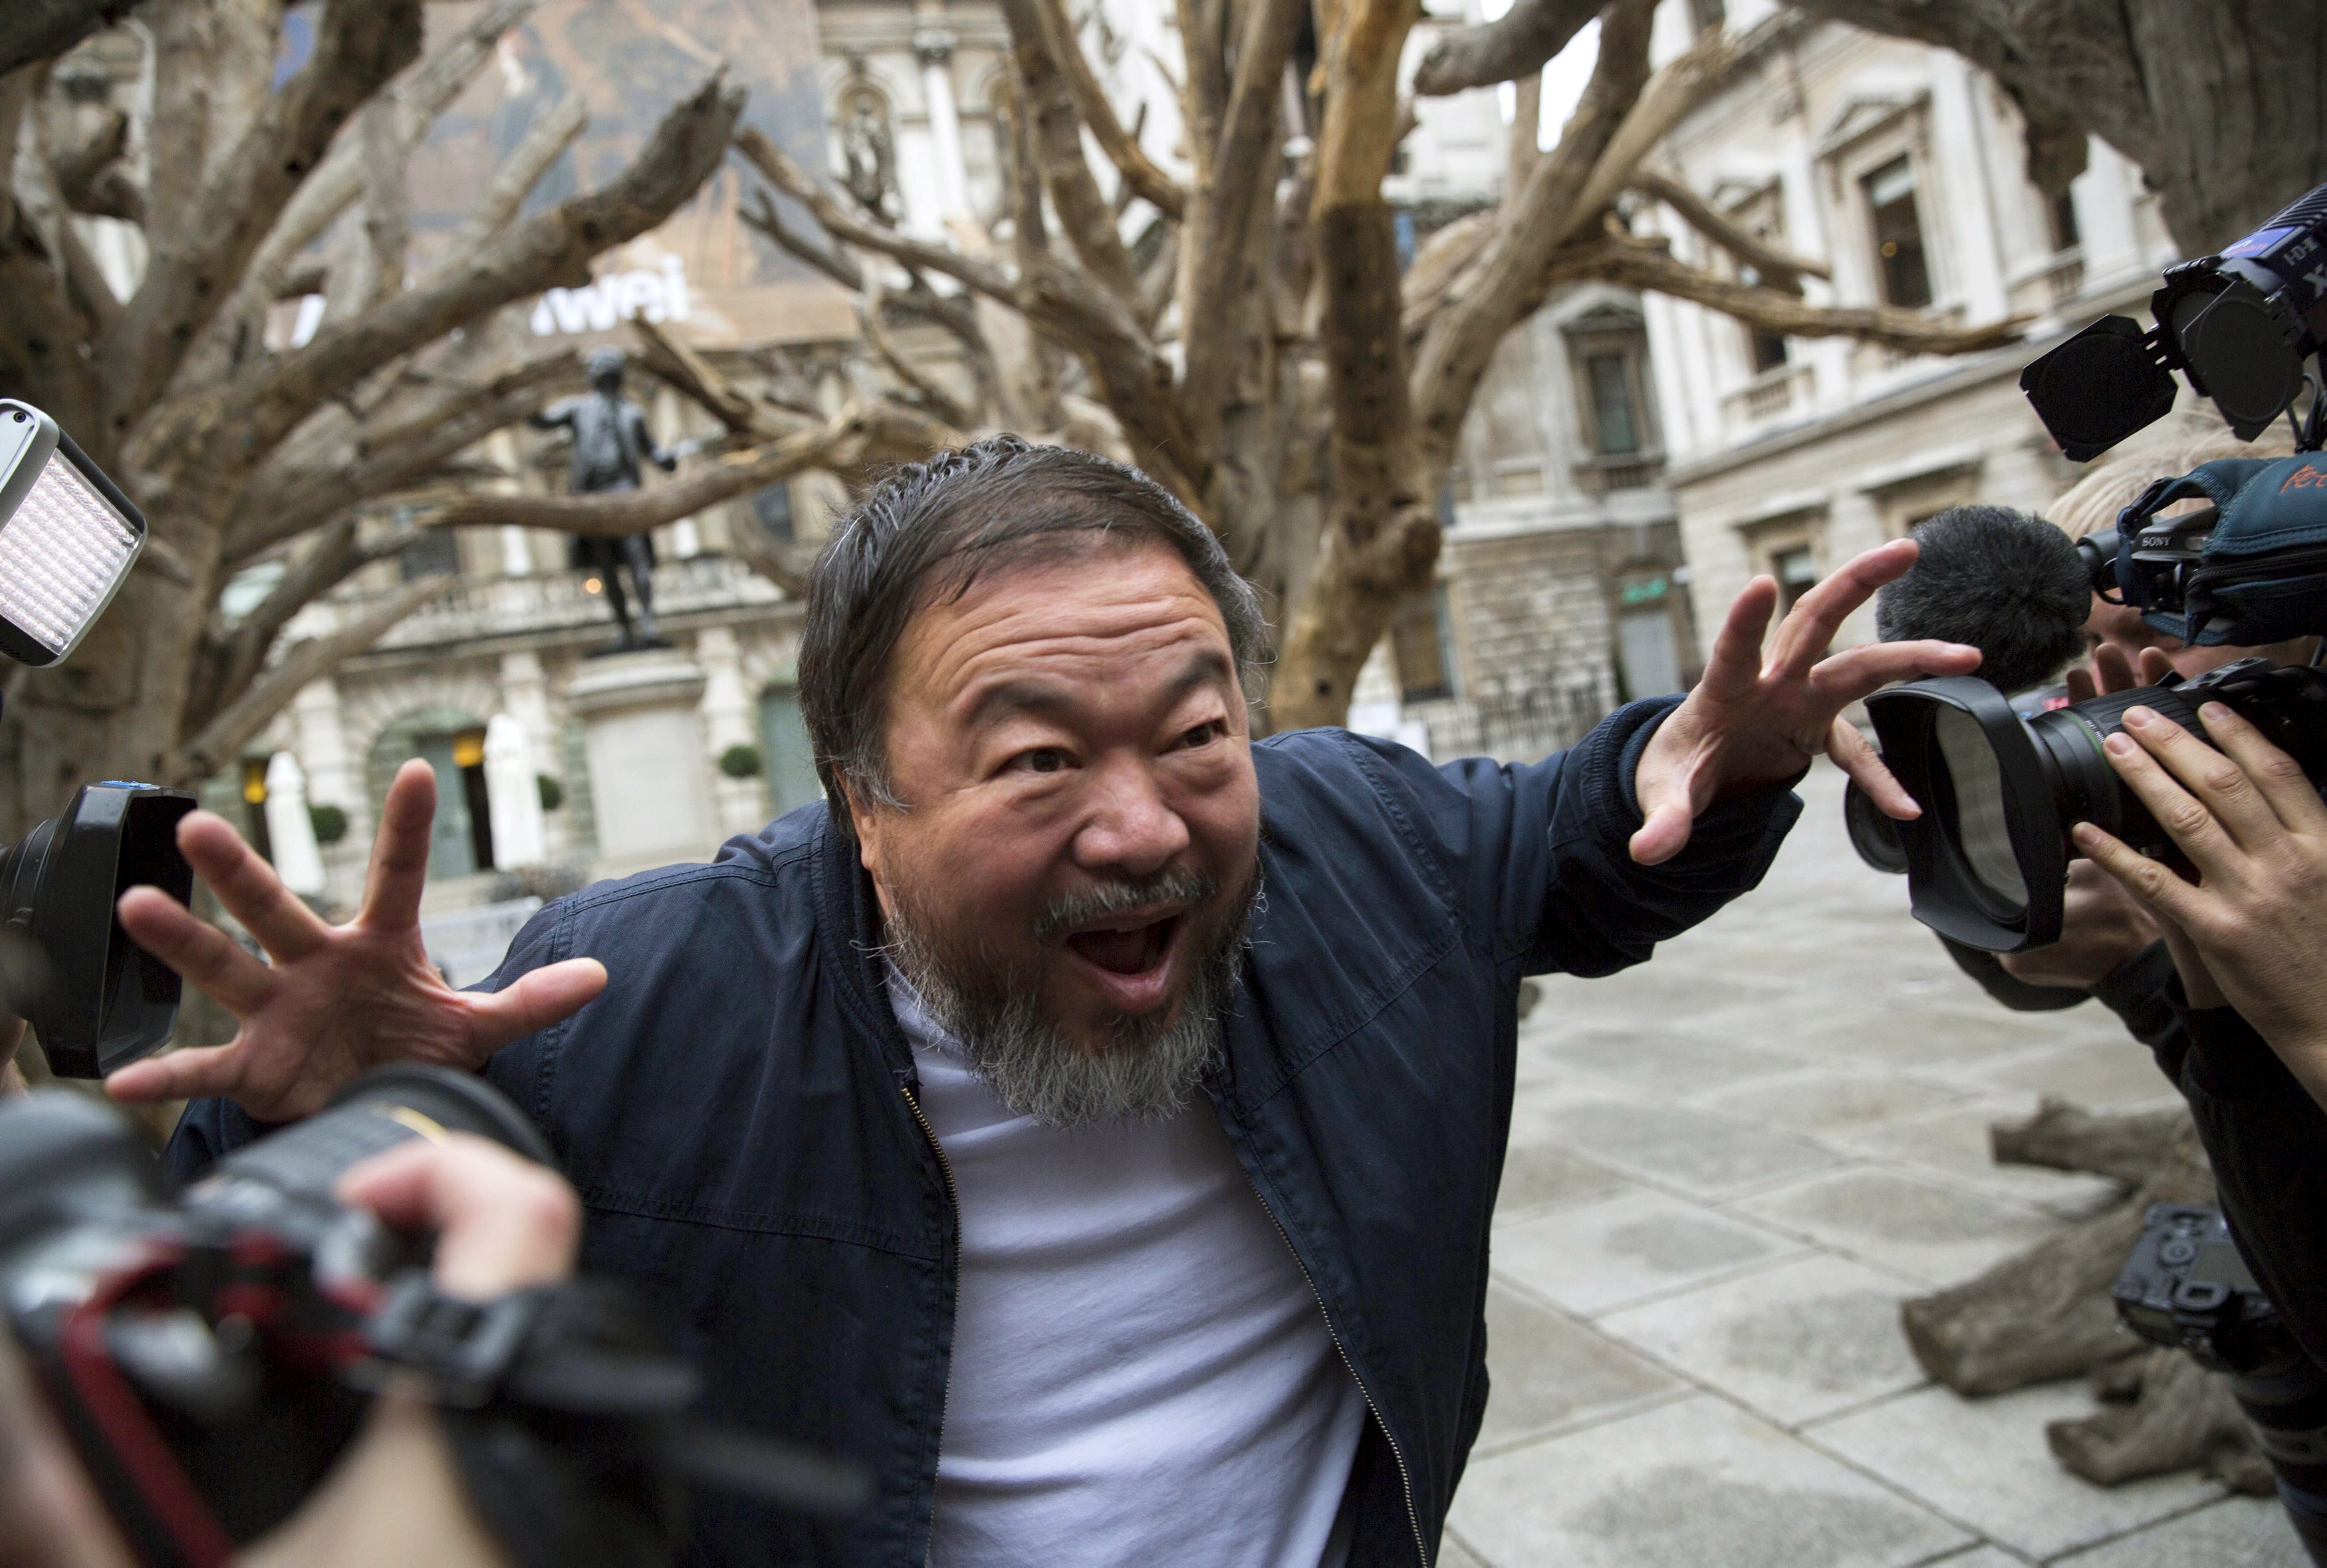 Chinese artist Ai Weiwei poses for photographers during a photocall for his exhibition at the Royal Academy of Arts in London, Britain September 15, 2015. REUTERS/Neil Hall TPX IMAGES OF THE DAY